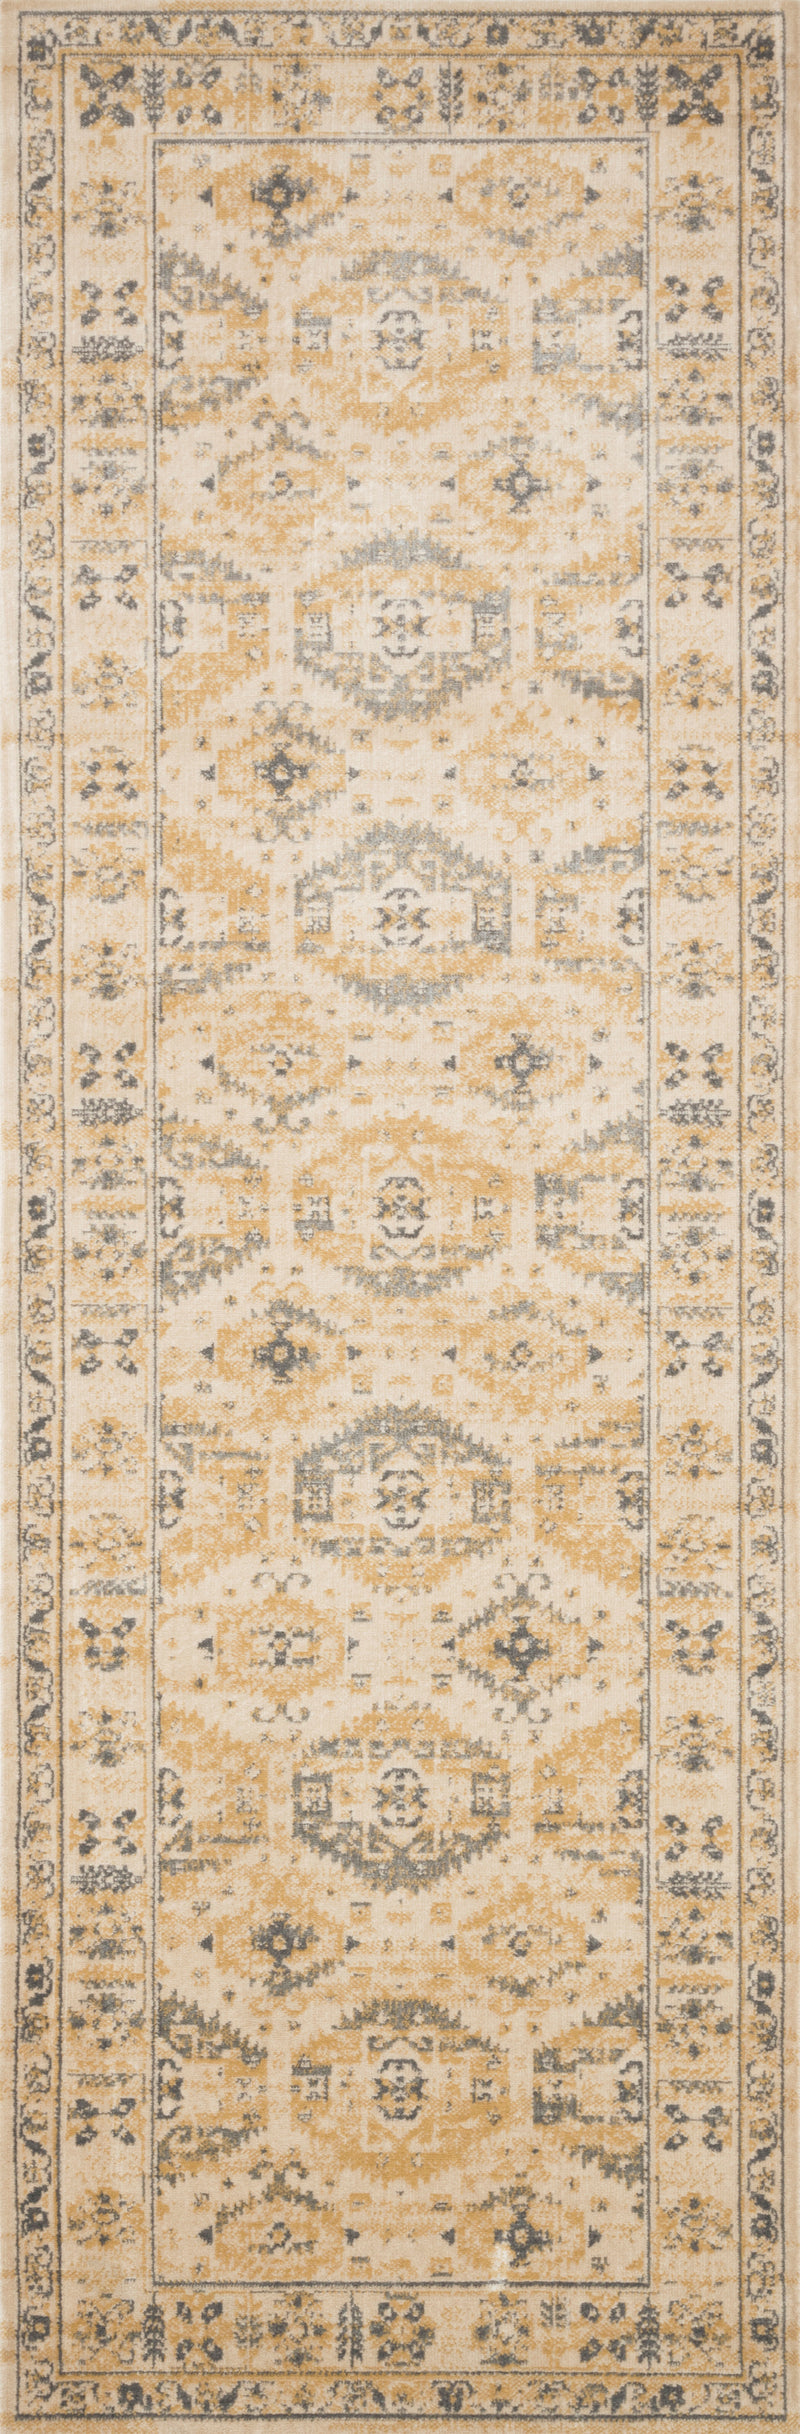 ISADORA Collection Rug  in  WHEAT / WHEAT Beige Accent Power-Loomed Polypropylene